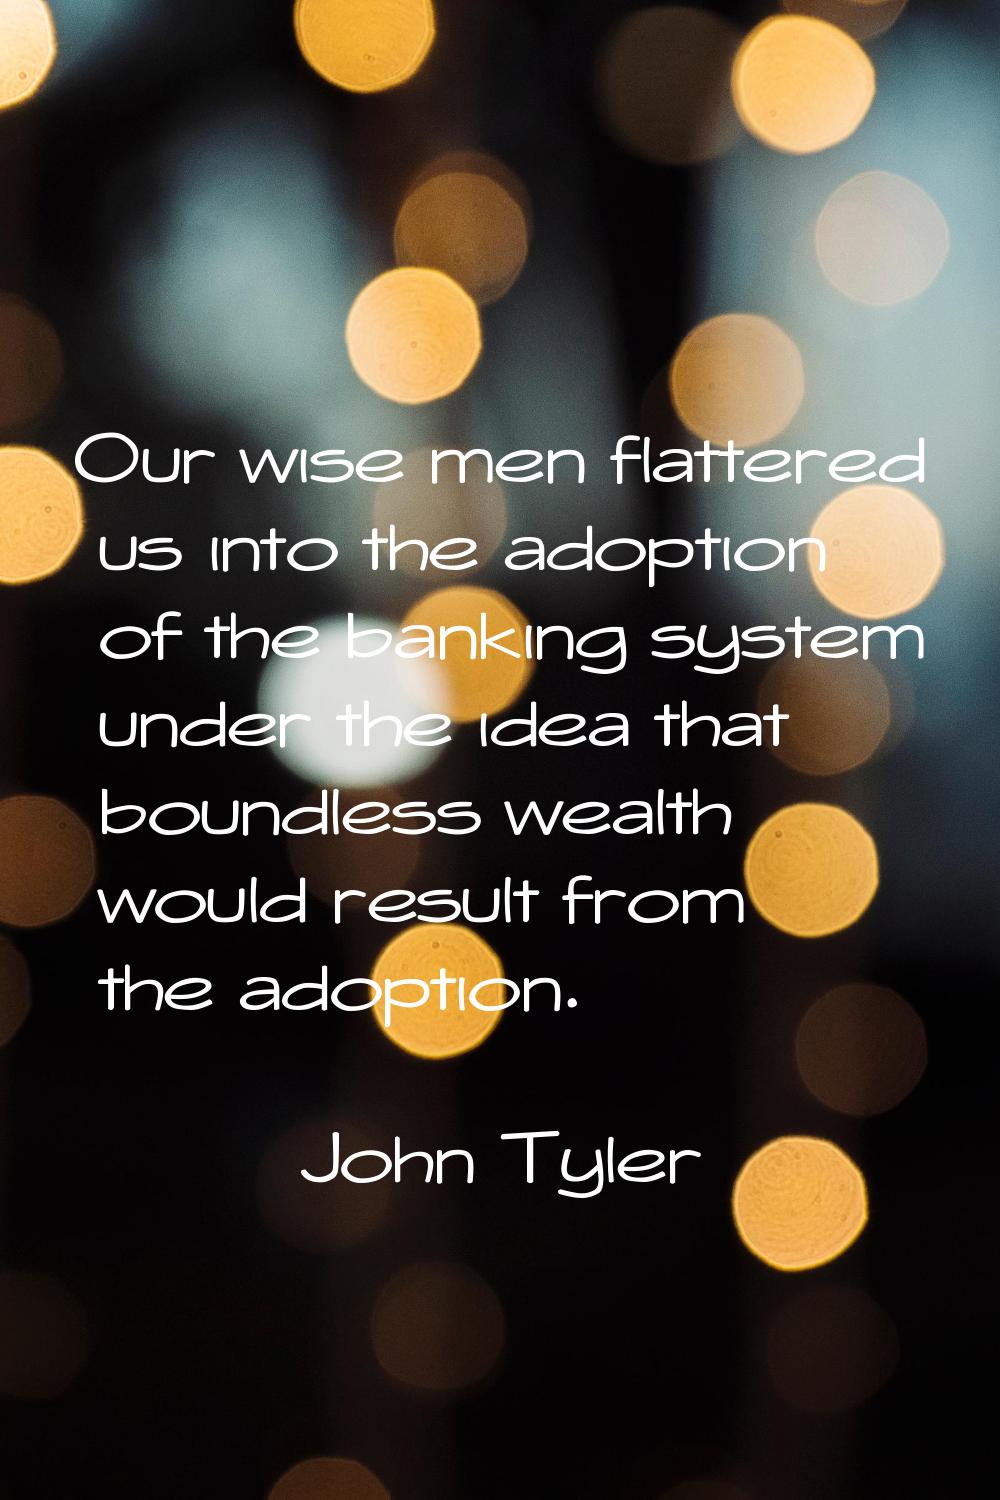 Our wise men flattered us into the adoption of the banking system under the idea that boundless wea